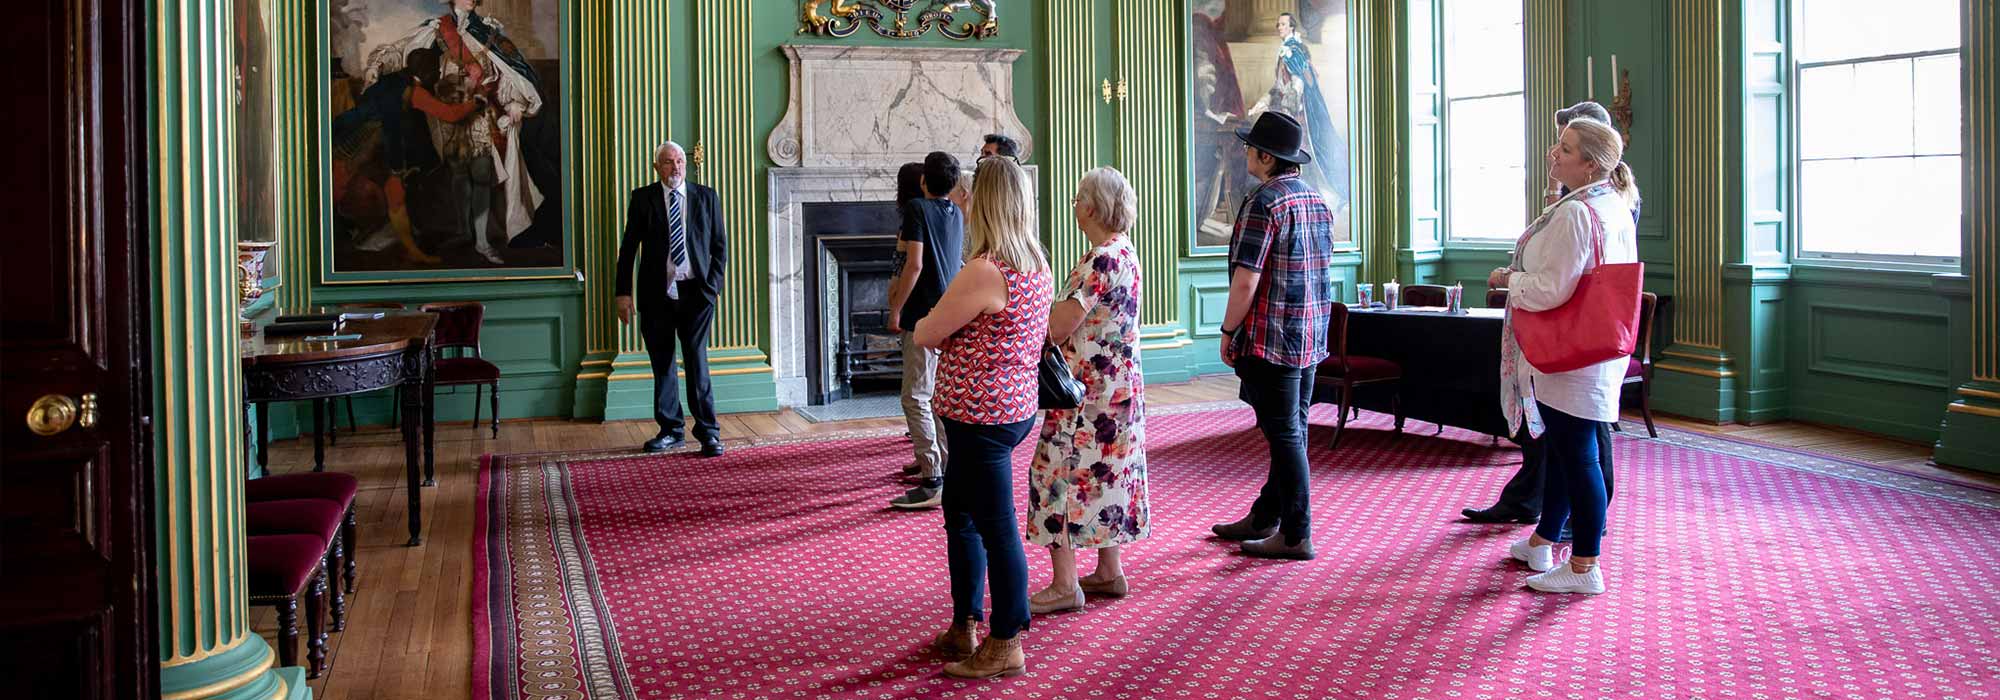 A socially distanced tour of the State Room at the Mansion House.